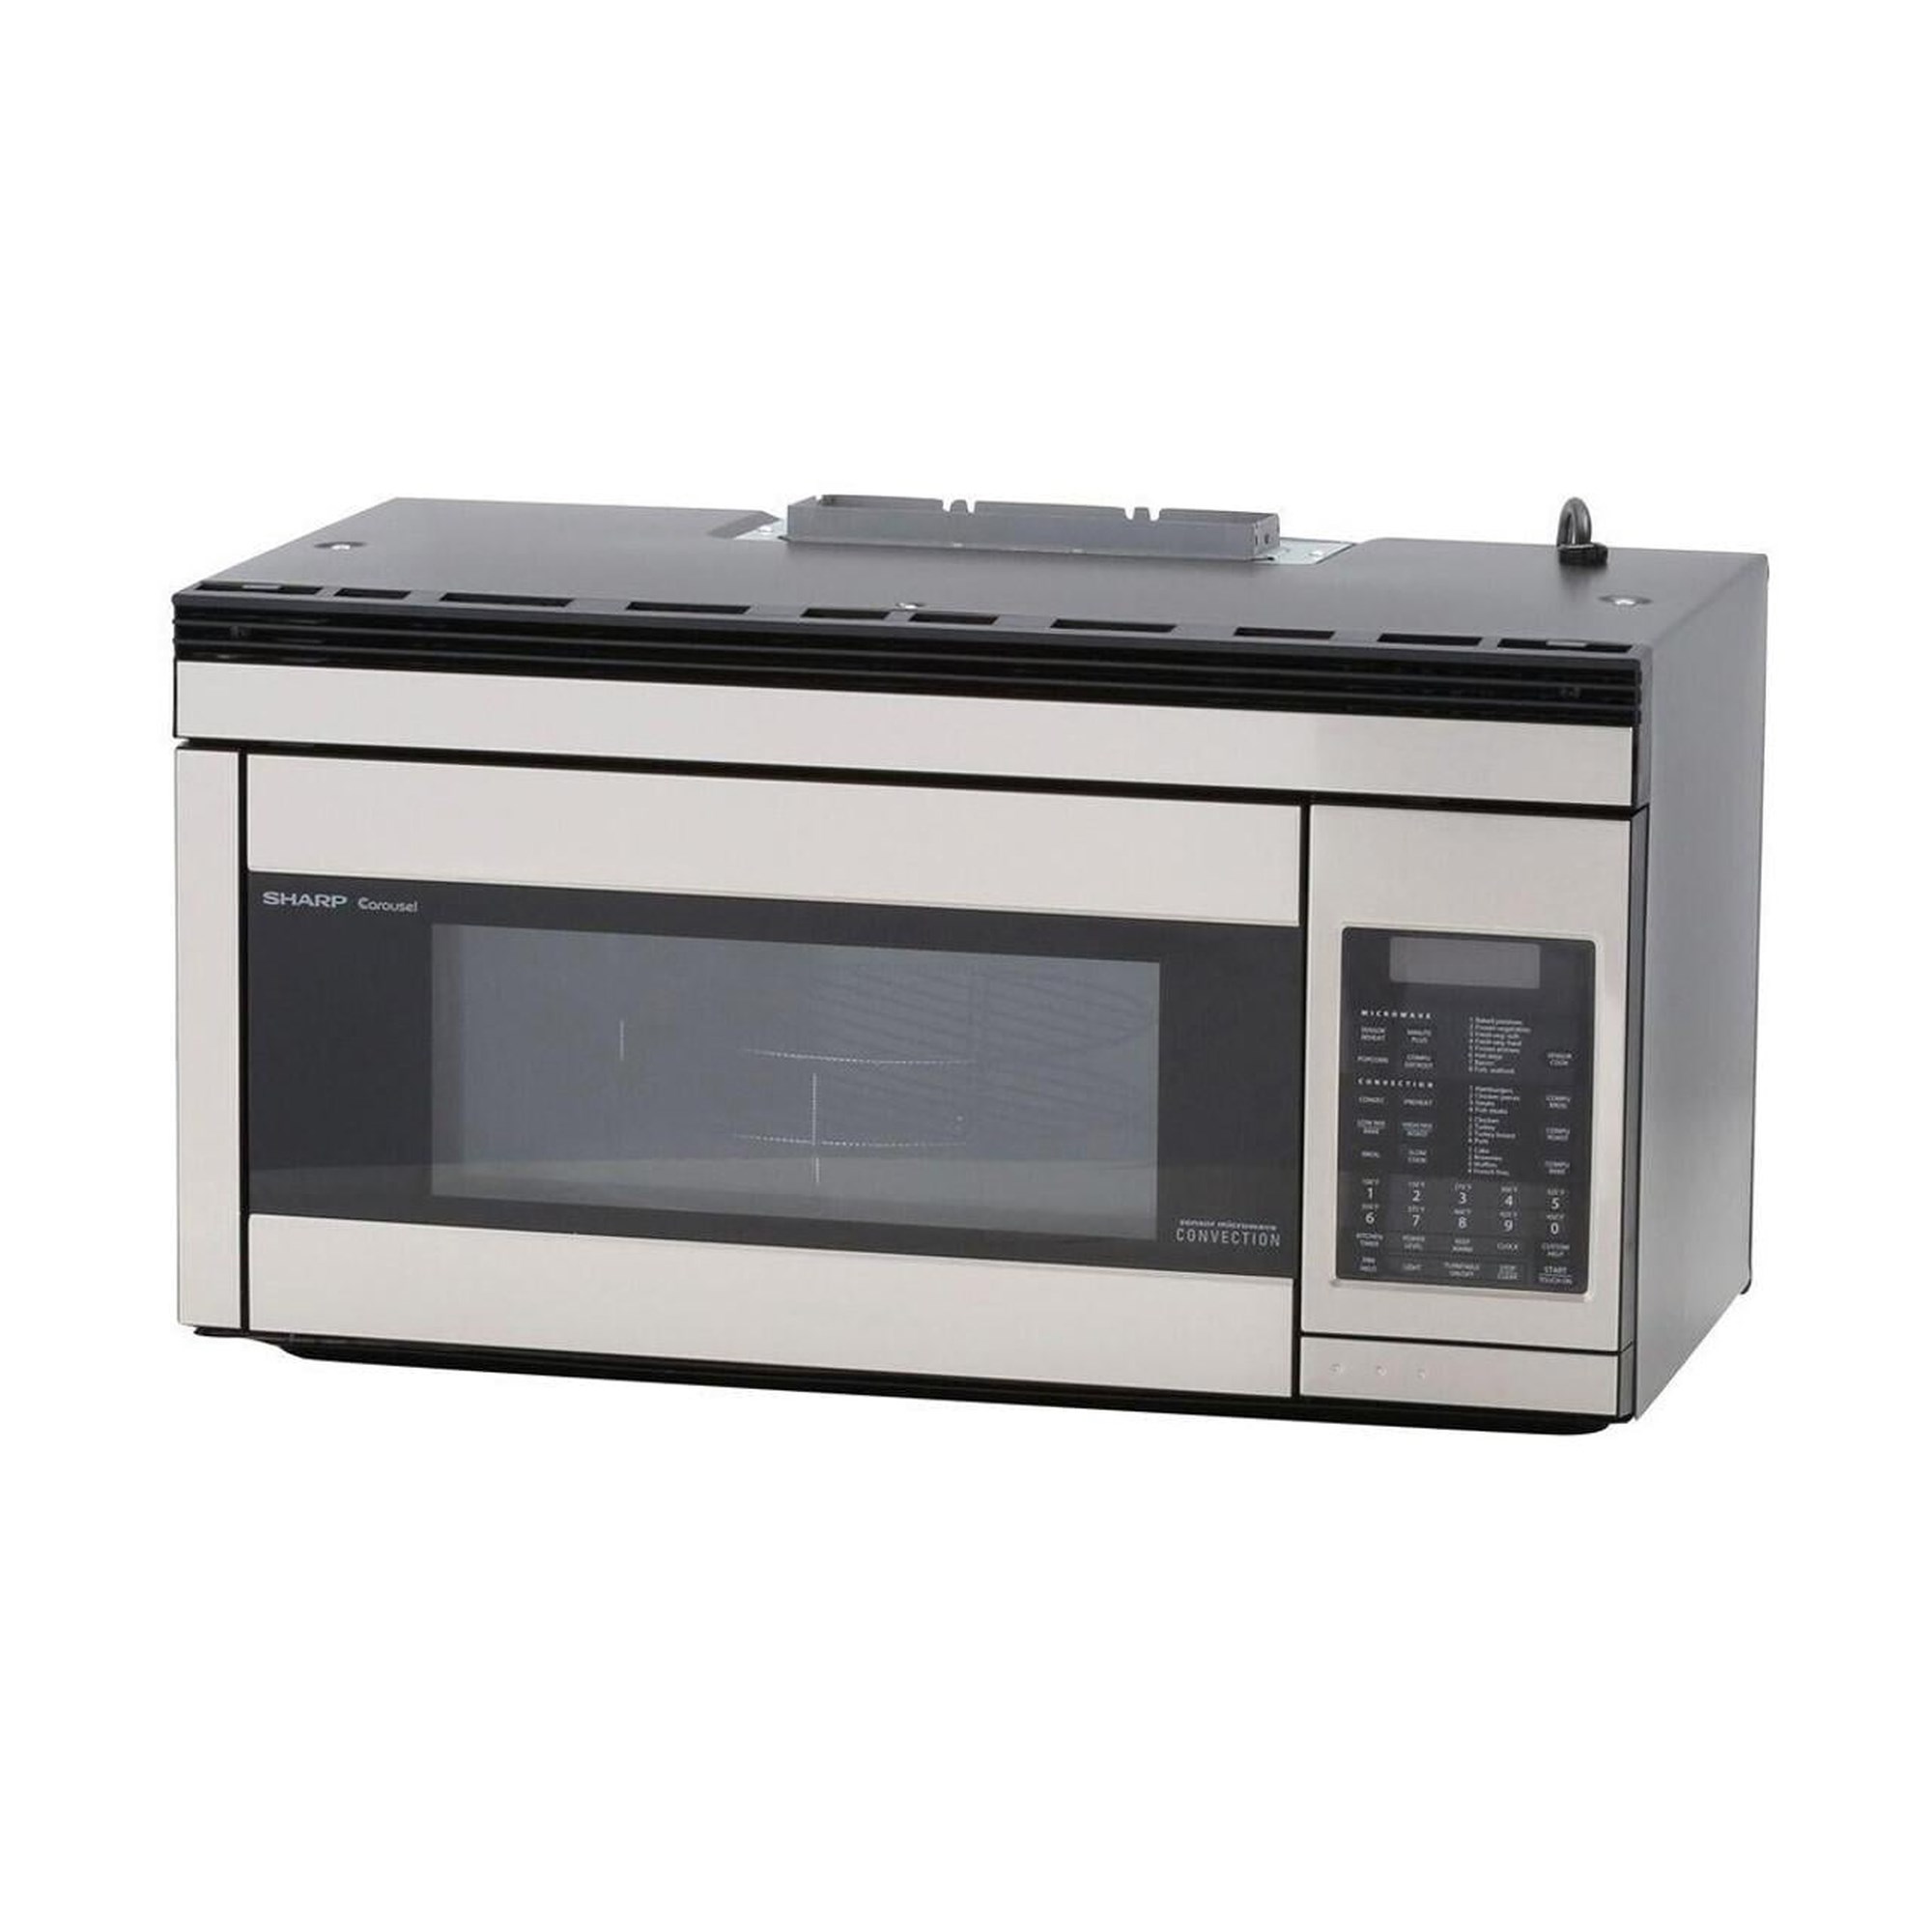 Sharp 1.1-Cu. ft. Countertop Microwave Oven, Stainless (Smc1162hs)